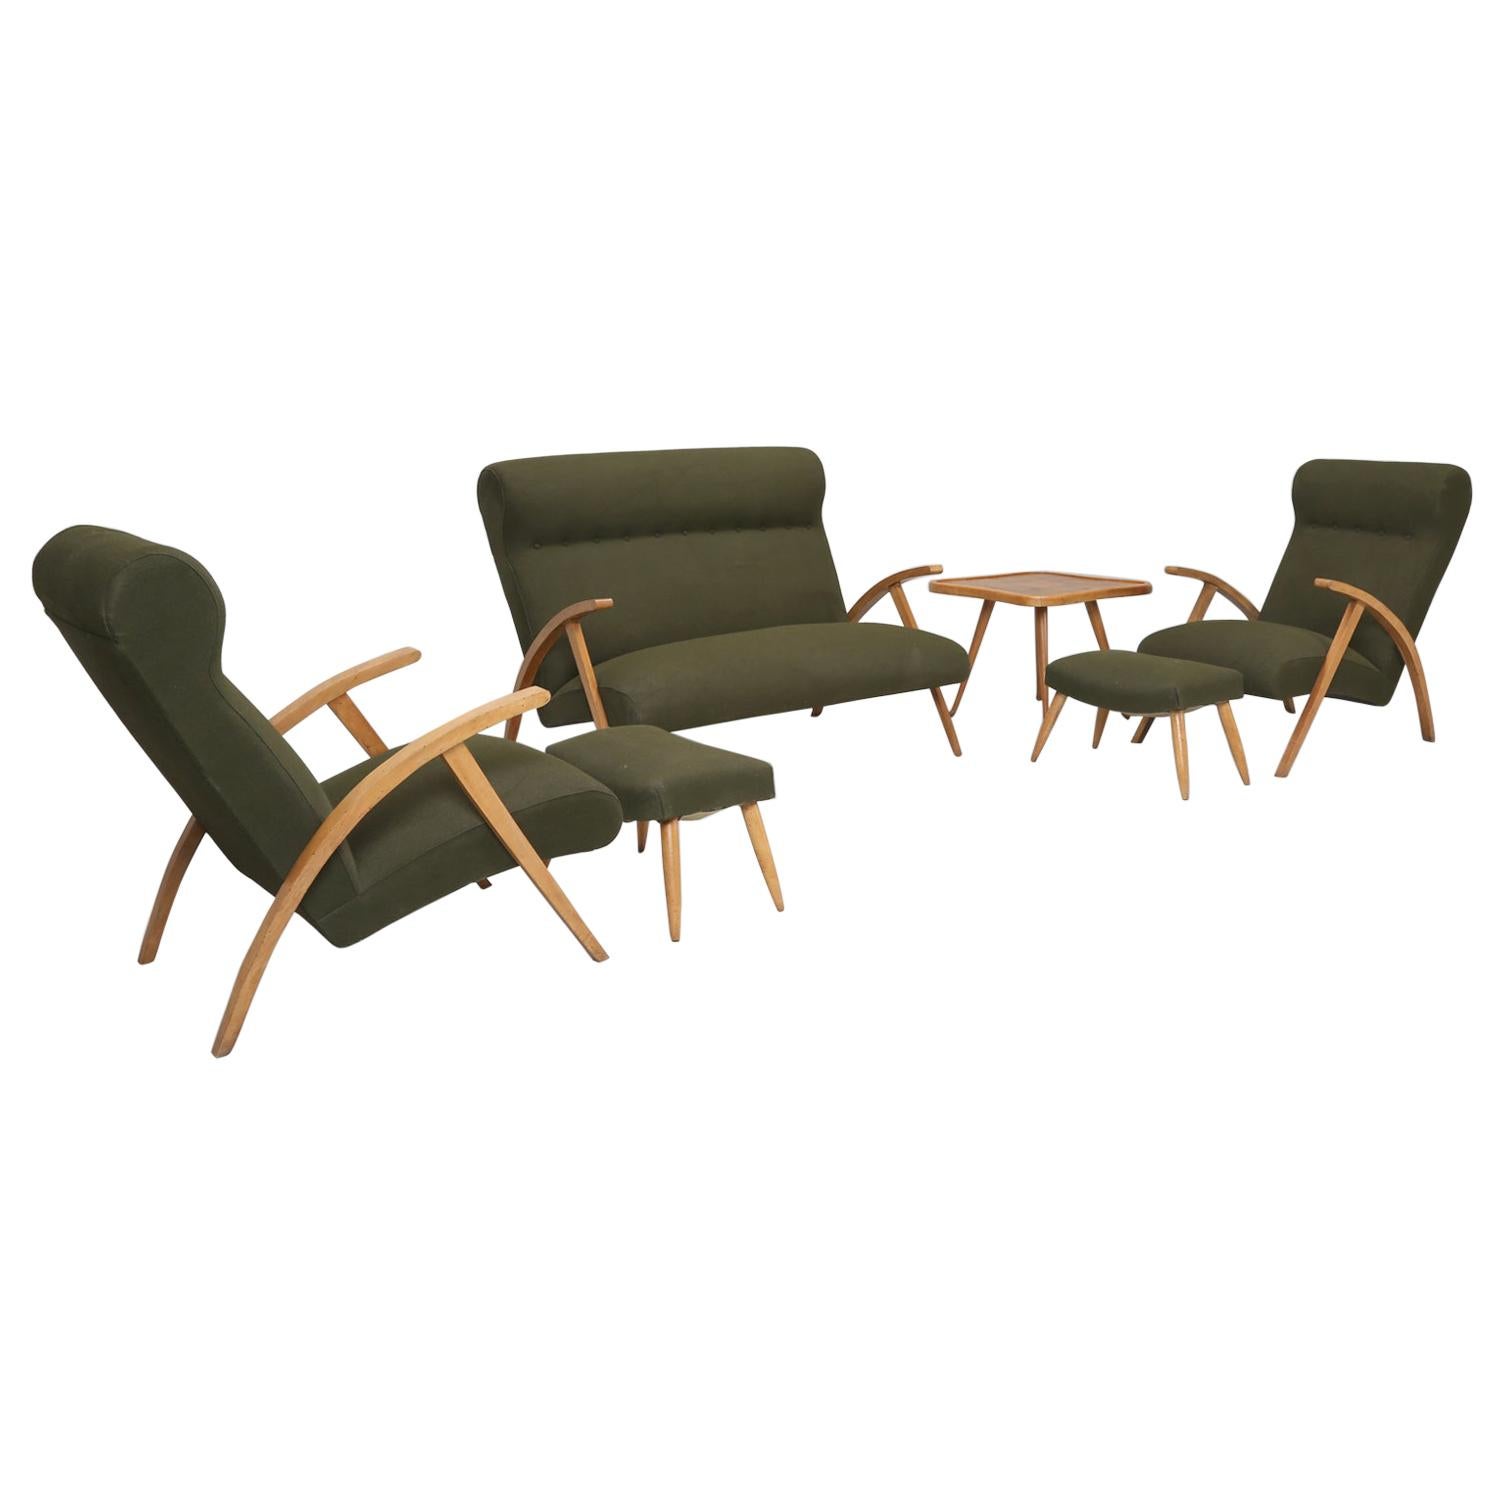 Italian Mid-Century Modern Complete Suite Chairs with Ottomans, Settee and Table For Sale